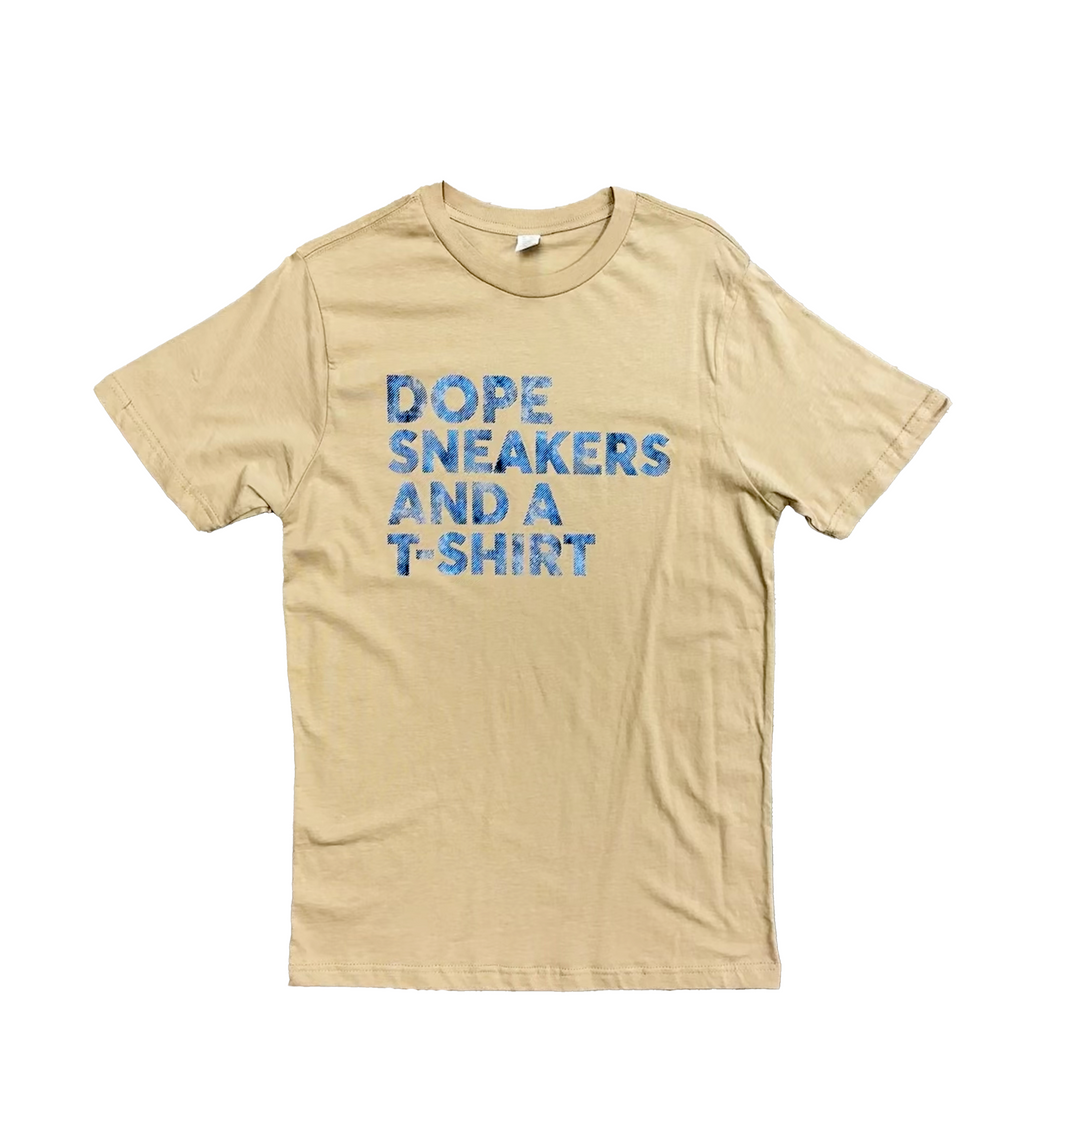 a t - shirt that says dope sneakers and a t - shirt